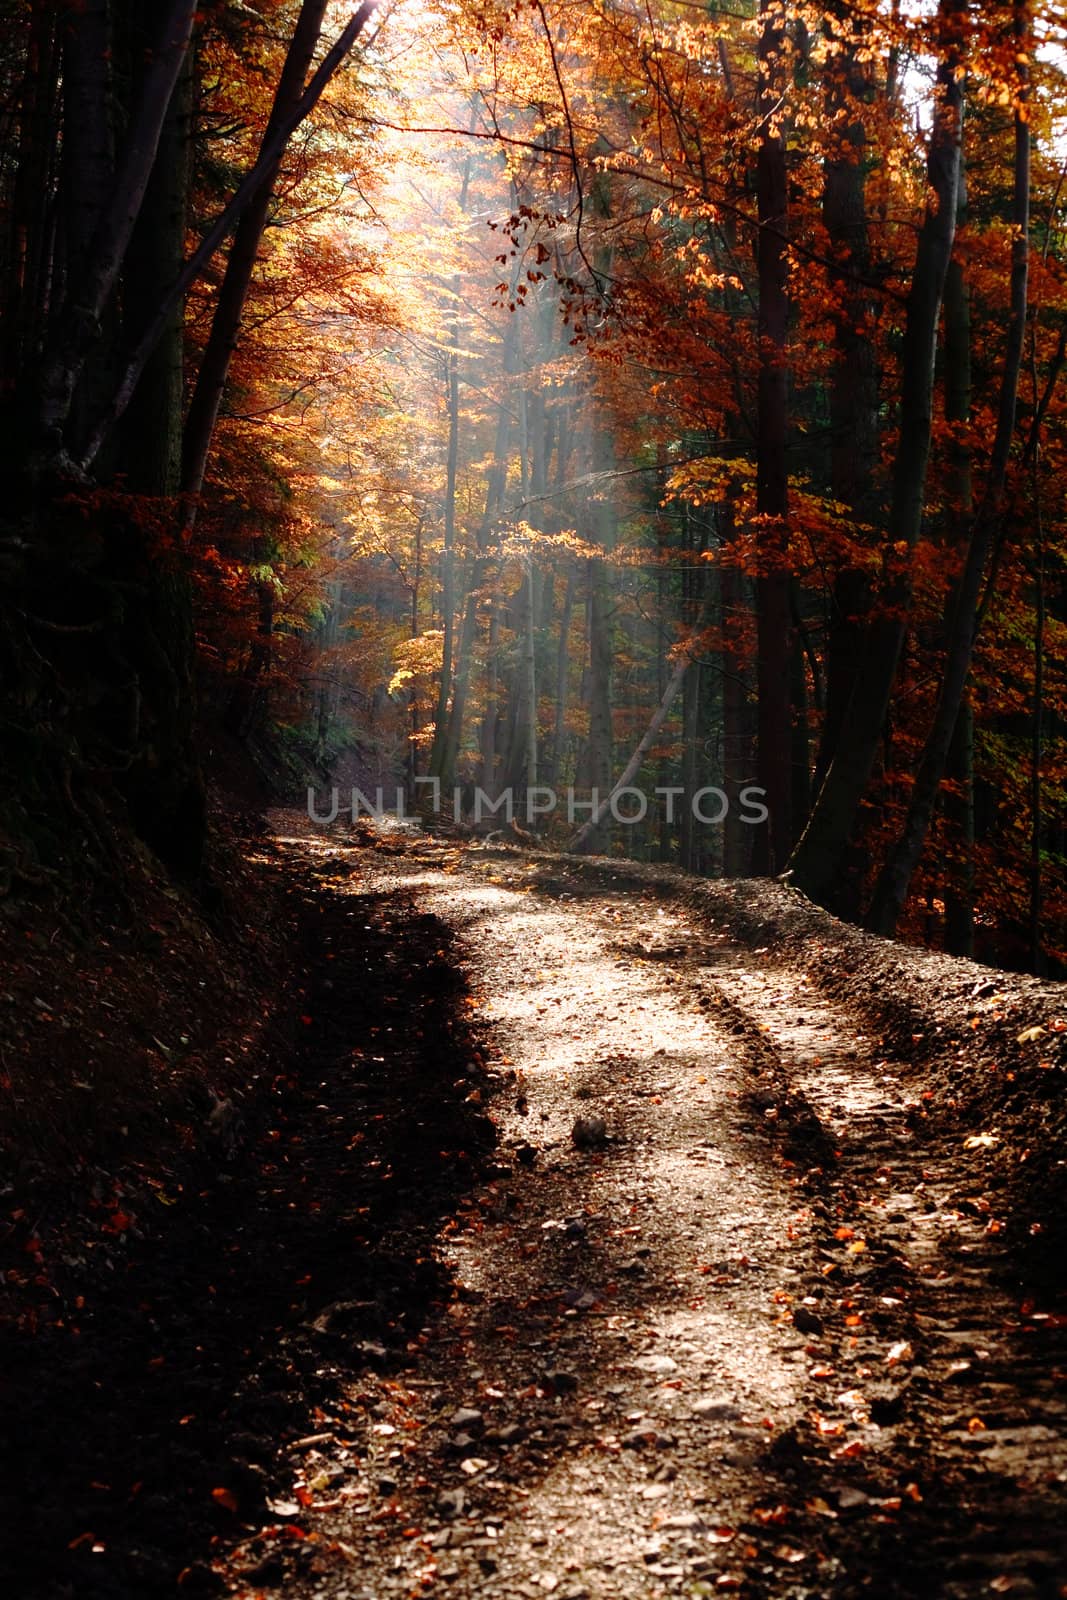 Ray of light in a forest. Autumn theme